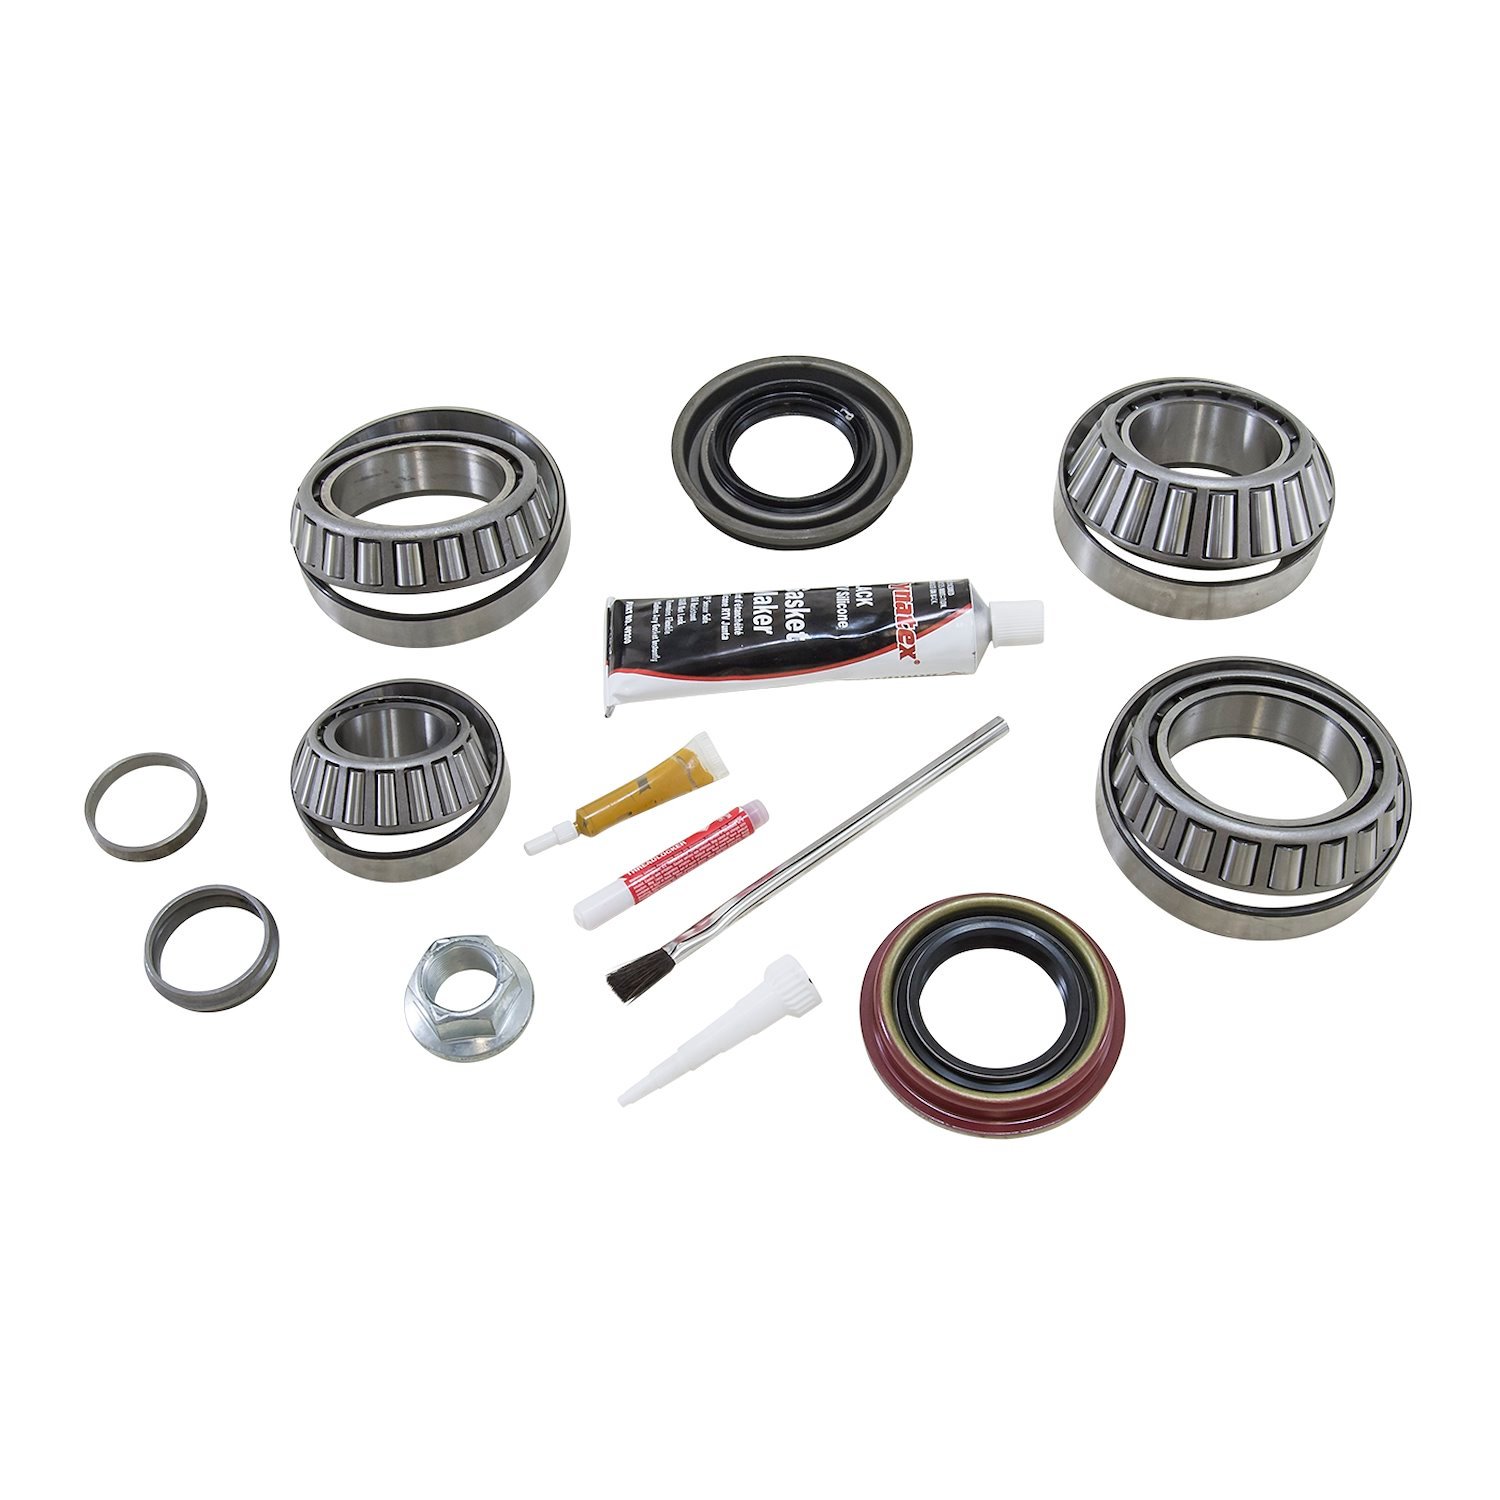 USA Standard ZBKF9.75D Bearing Kit, For '11 & Up Ford 9.75